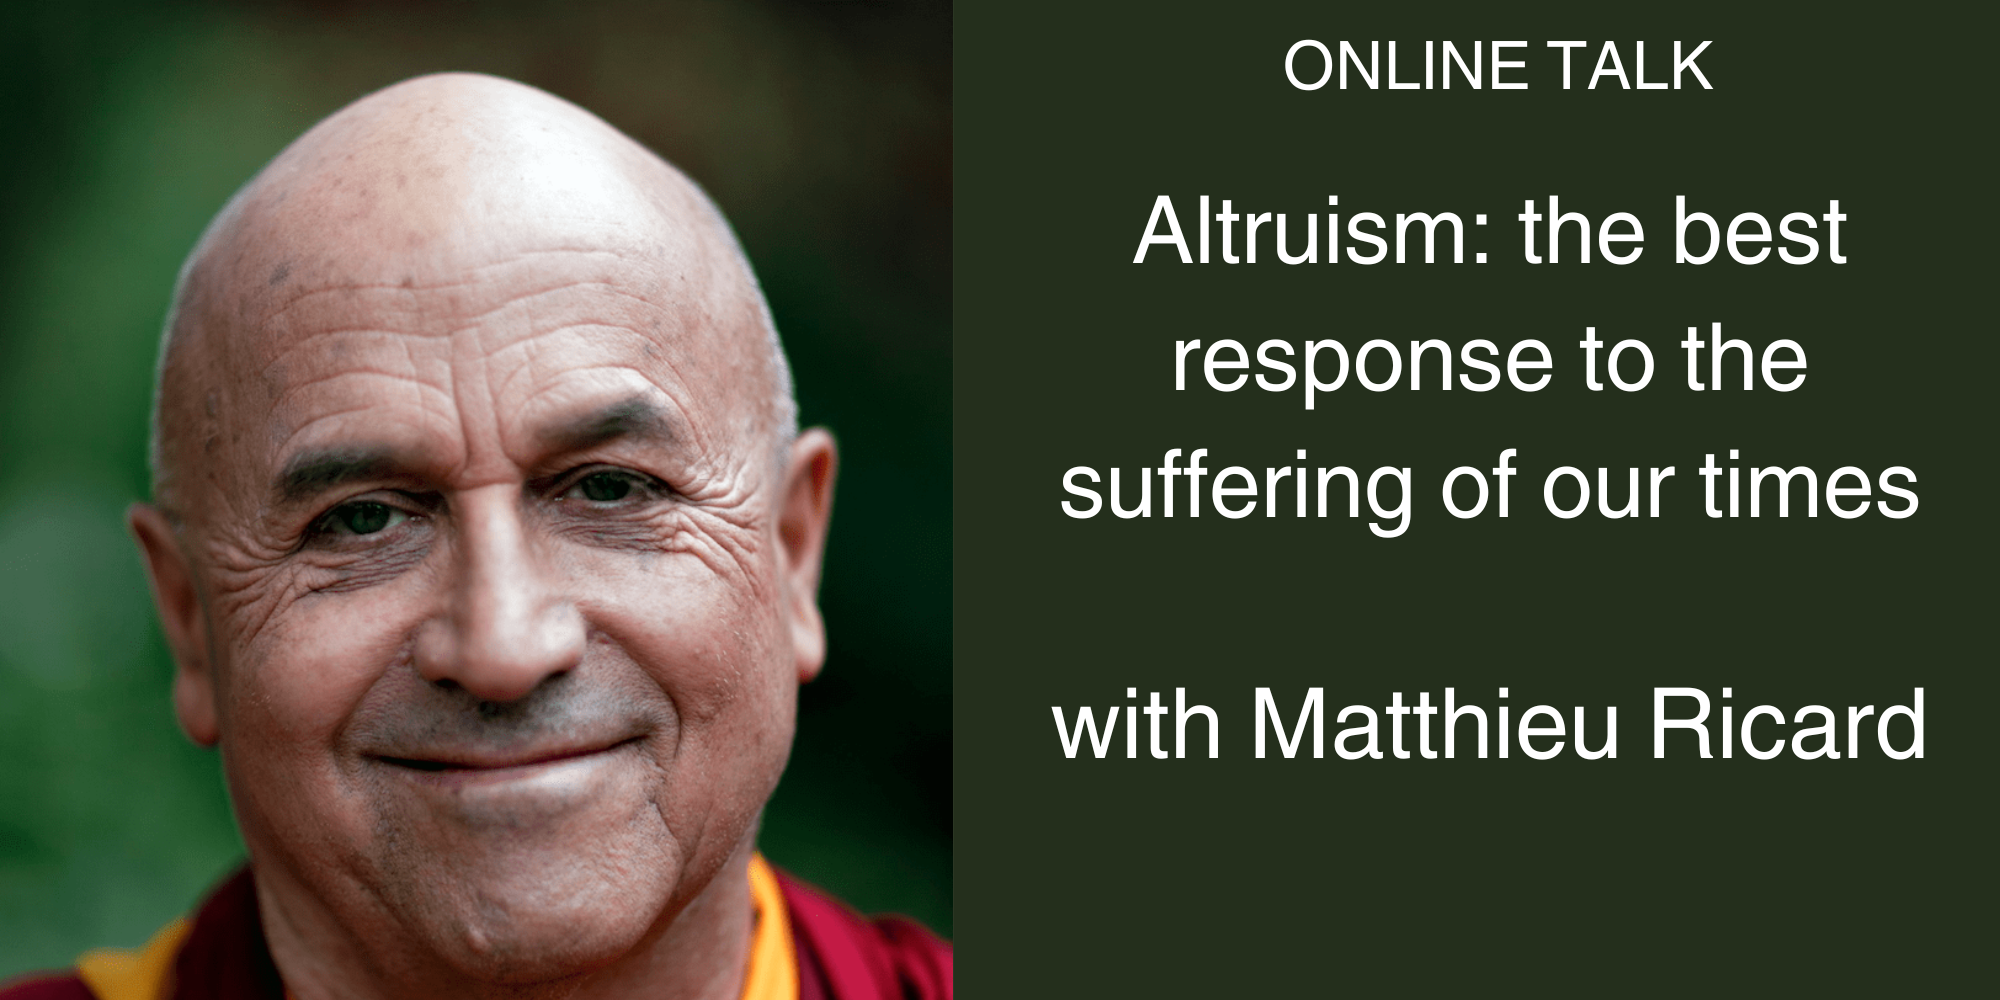 Portrait of Matthieu Ricard for talk on Altruism